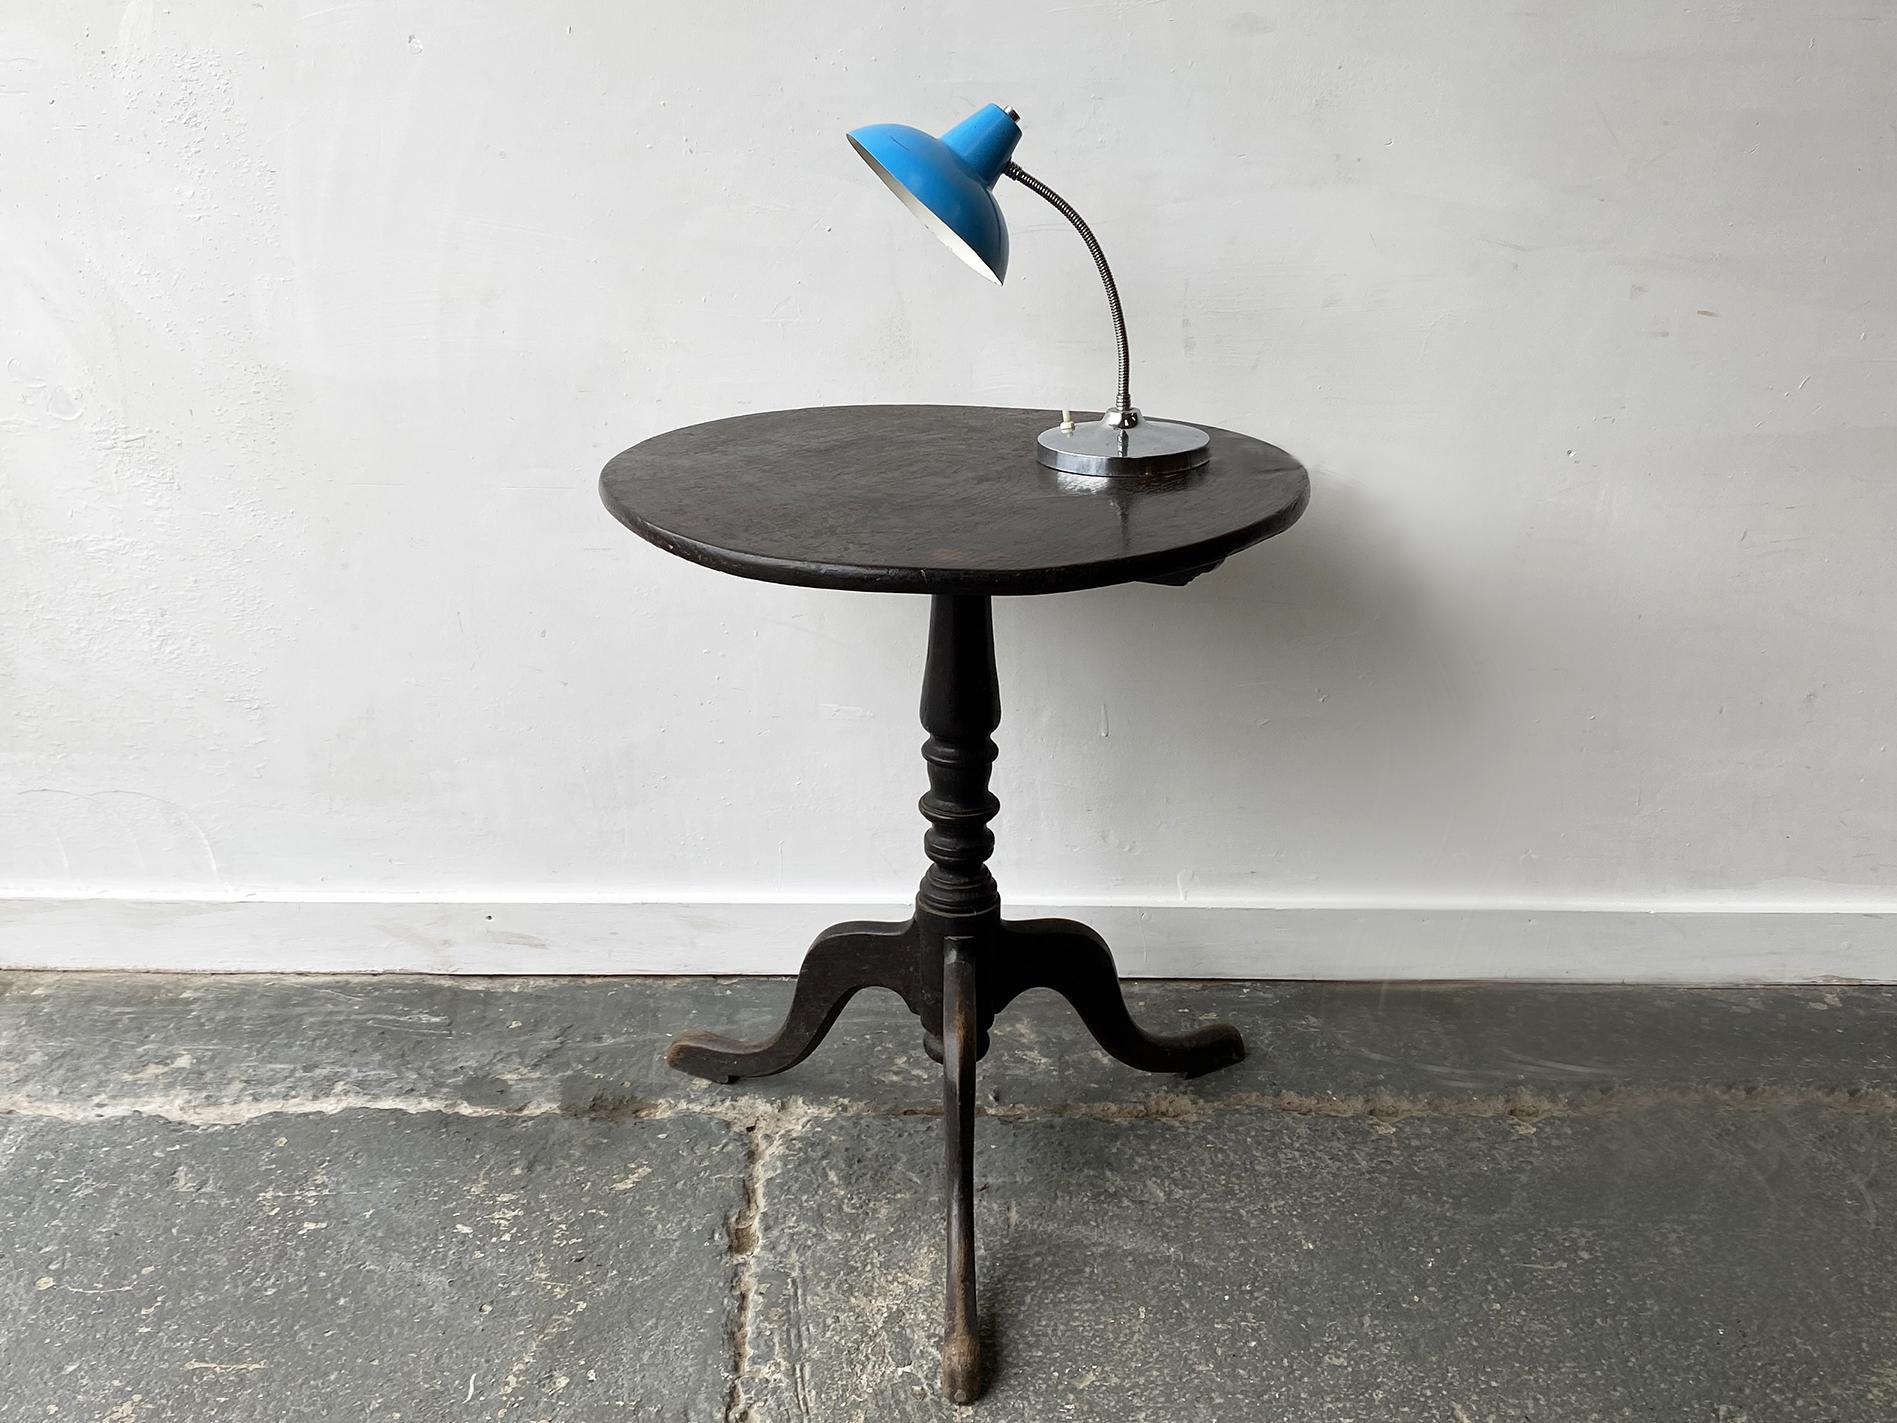 Circular tilting top 19th century side table. A vase turned pillar and three down swept legs terminating in a grip form base. Very dark in colour, with beautiful aged patina. The tilt top makes the table easy to store when not in use.

Size